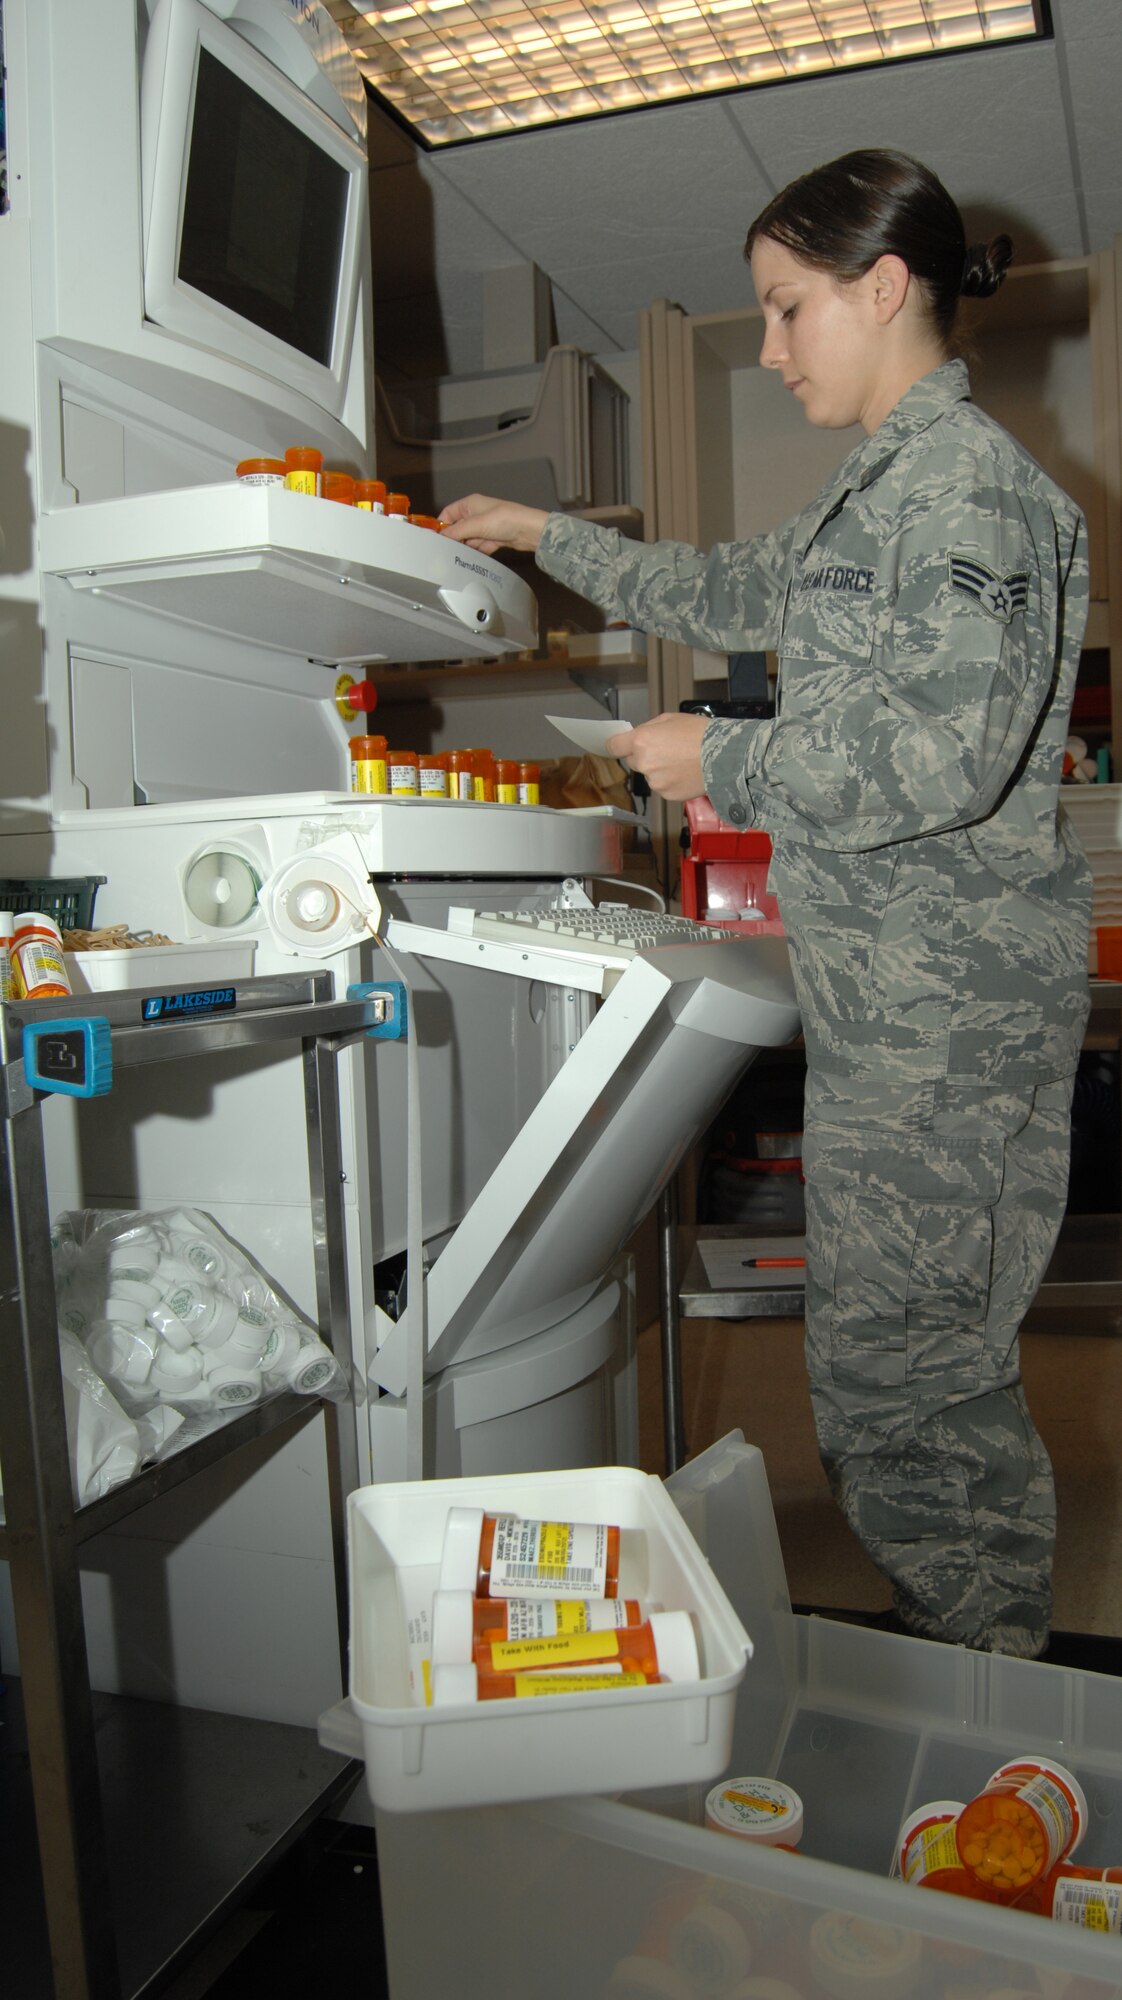 U.S. Air Force Senior Airman Samantha Womble, 355th Medical Support Squadron pharmacy technician, uses a machine to fill prescriptions on Davis-Monthan Air Force Base, Ariz., Nov. 27. The machine uses a robotic arm to accurately fill prescription bottles. (U.S. Air Force photo by Senior Airman Michael Washburn/Released)